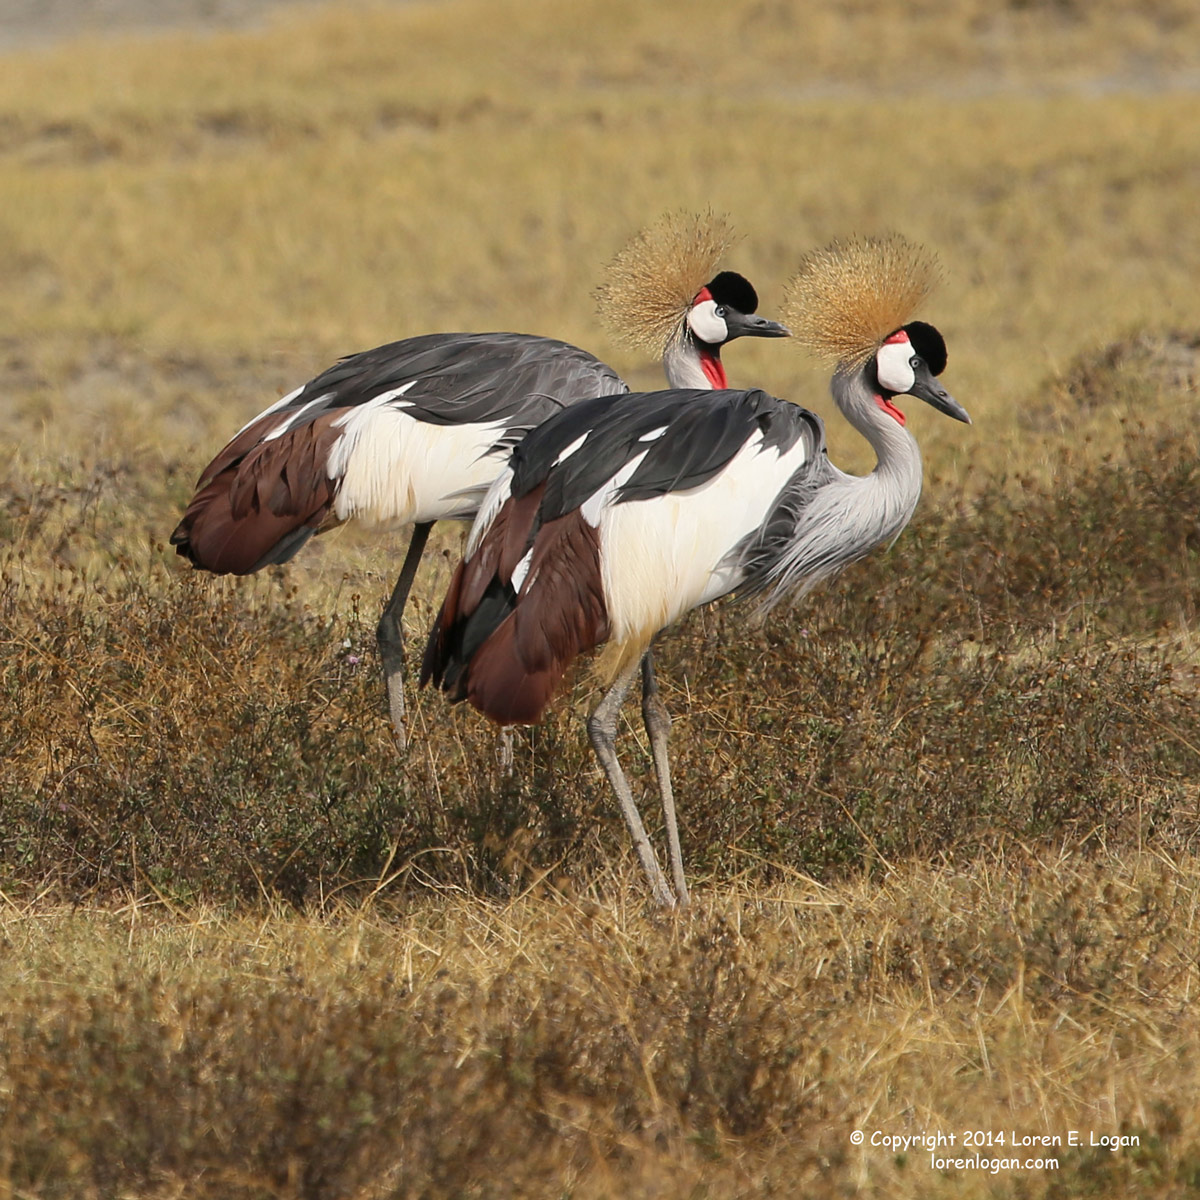 Always in pairs, these Grey-crowned Crane, also called African Cranes, move elegantly through their environment.